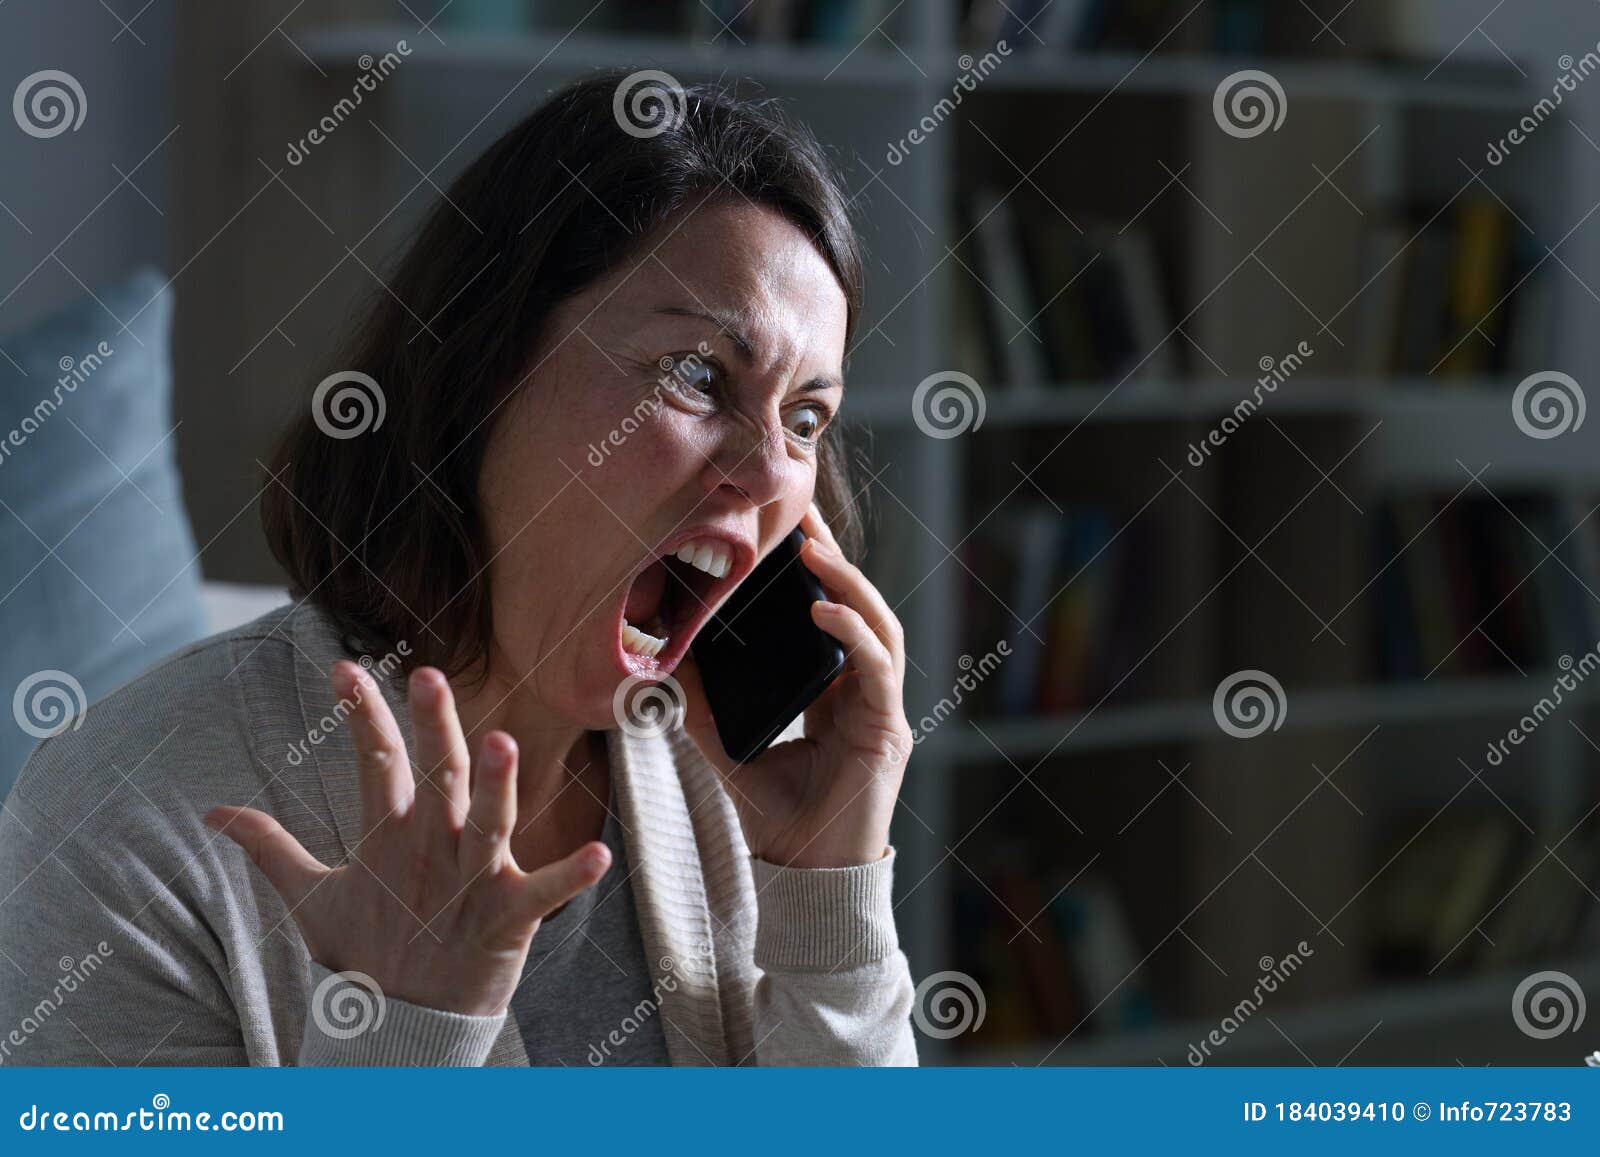 angry adult woman screaming calling on phone at night at home